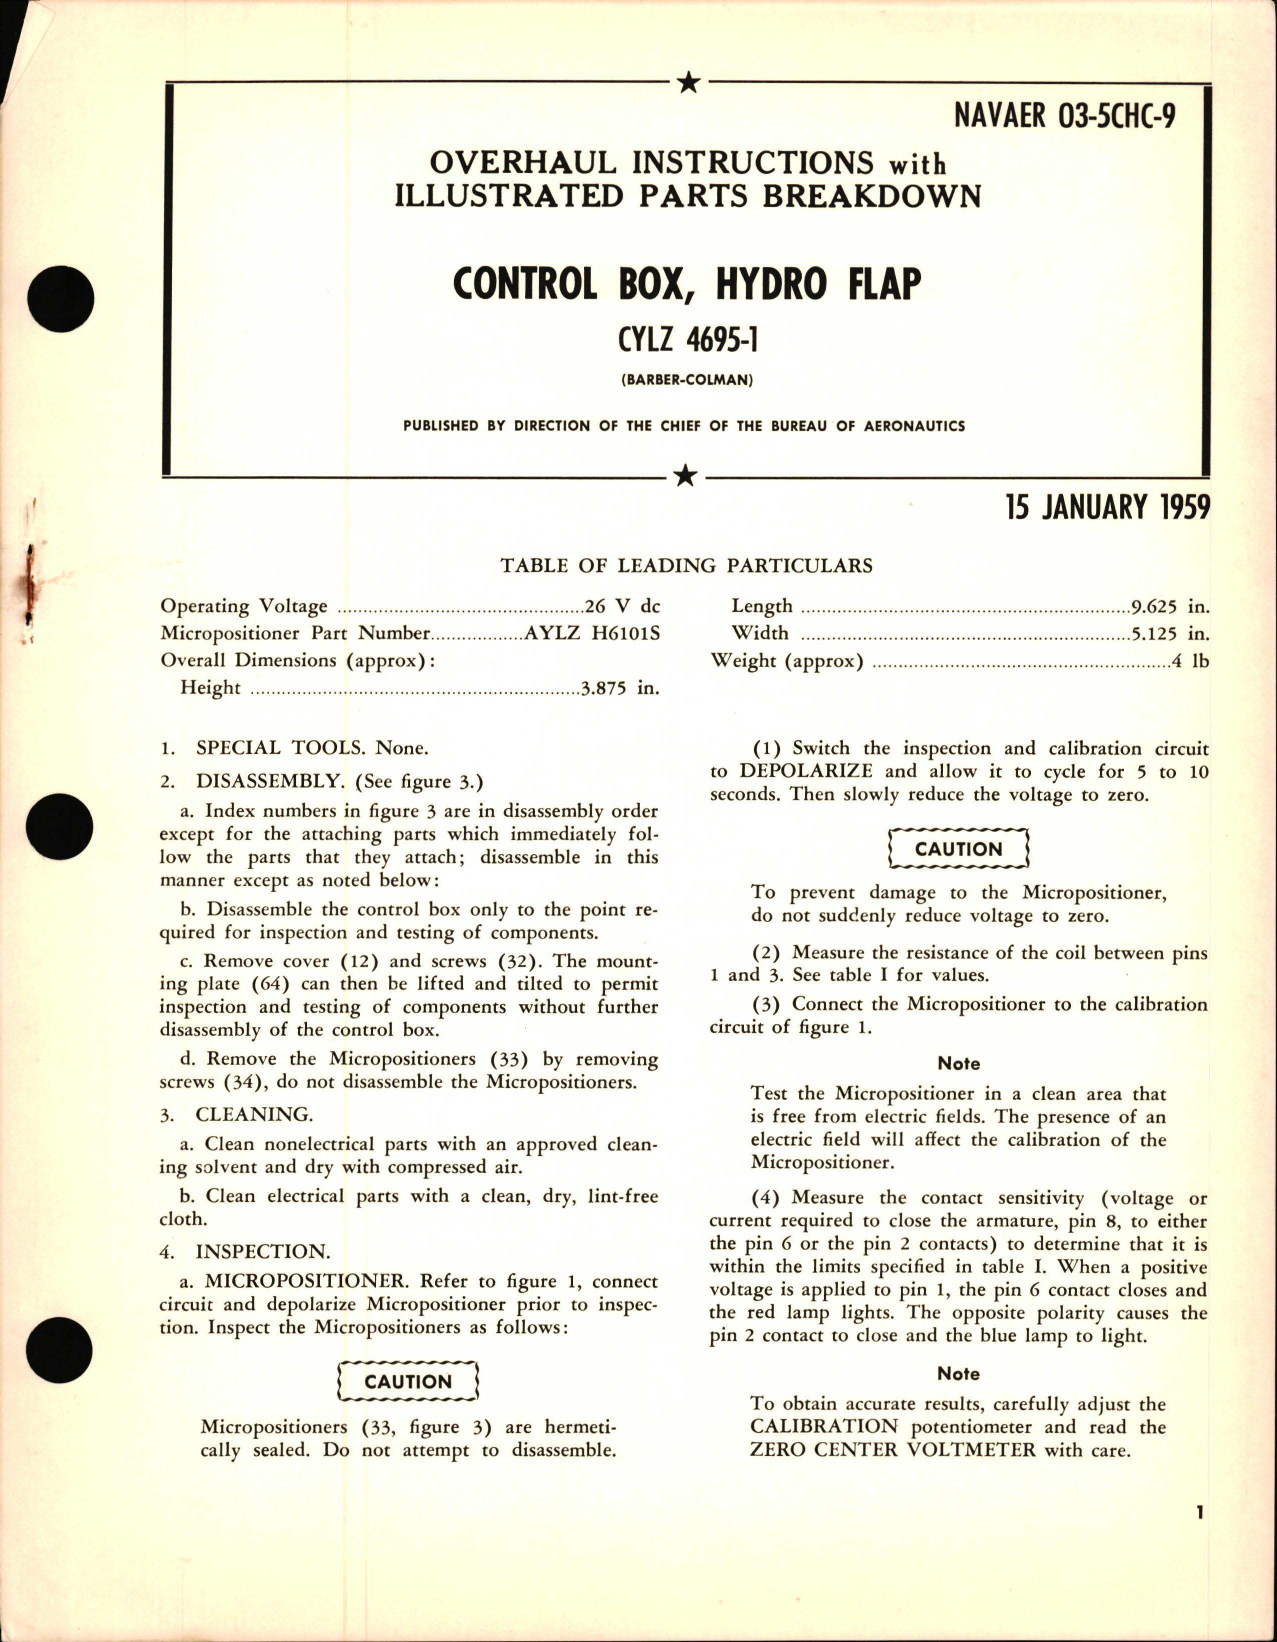 Sample page 1 from AirCorps Library document: Overhaul Instructions with Illustrated Parts Breakdown for Hydro Flap Control Box - CYLZ 4695-1 